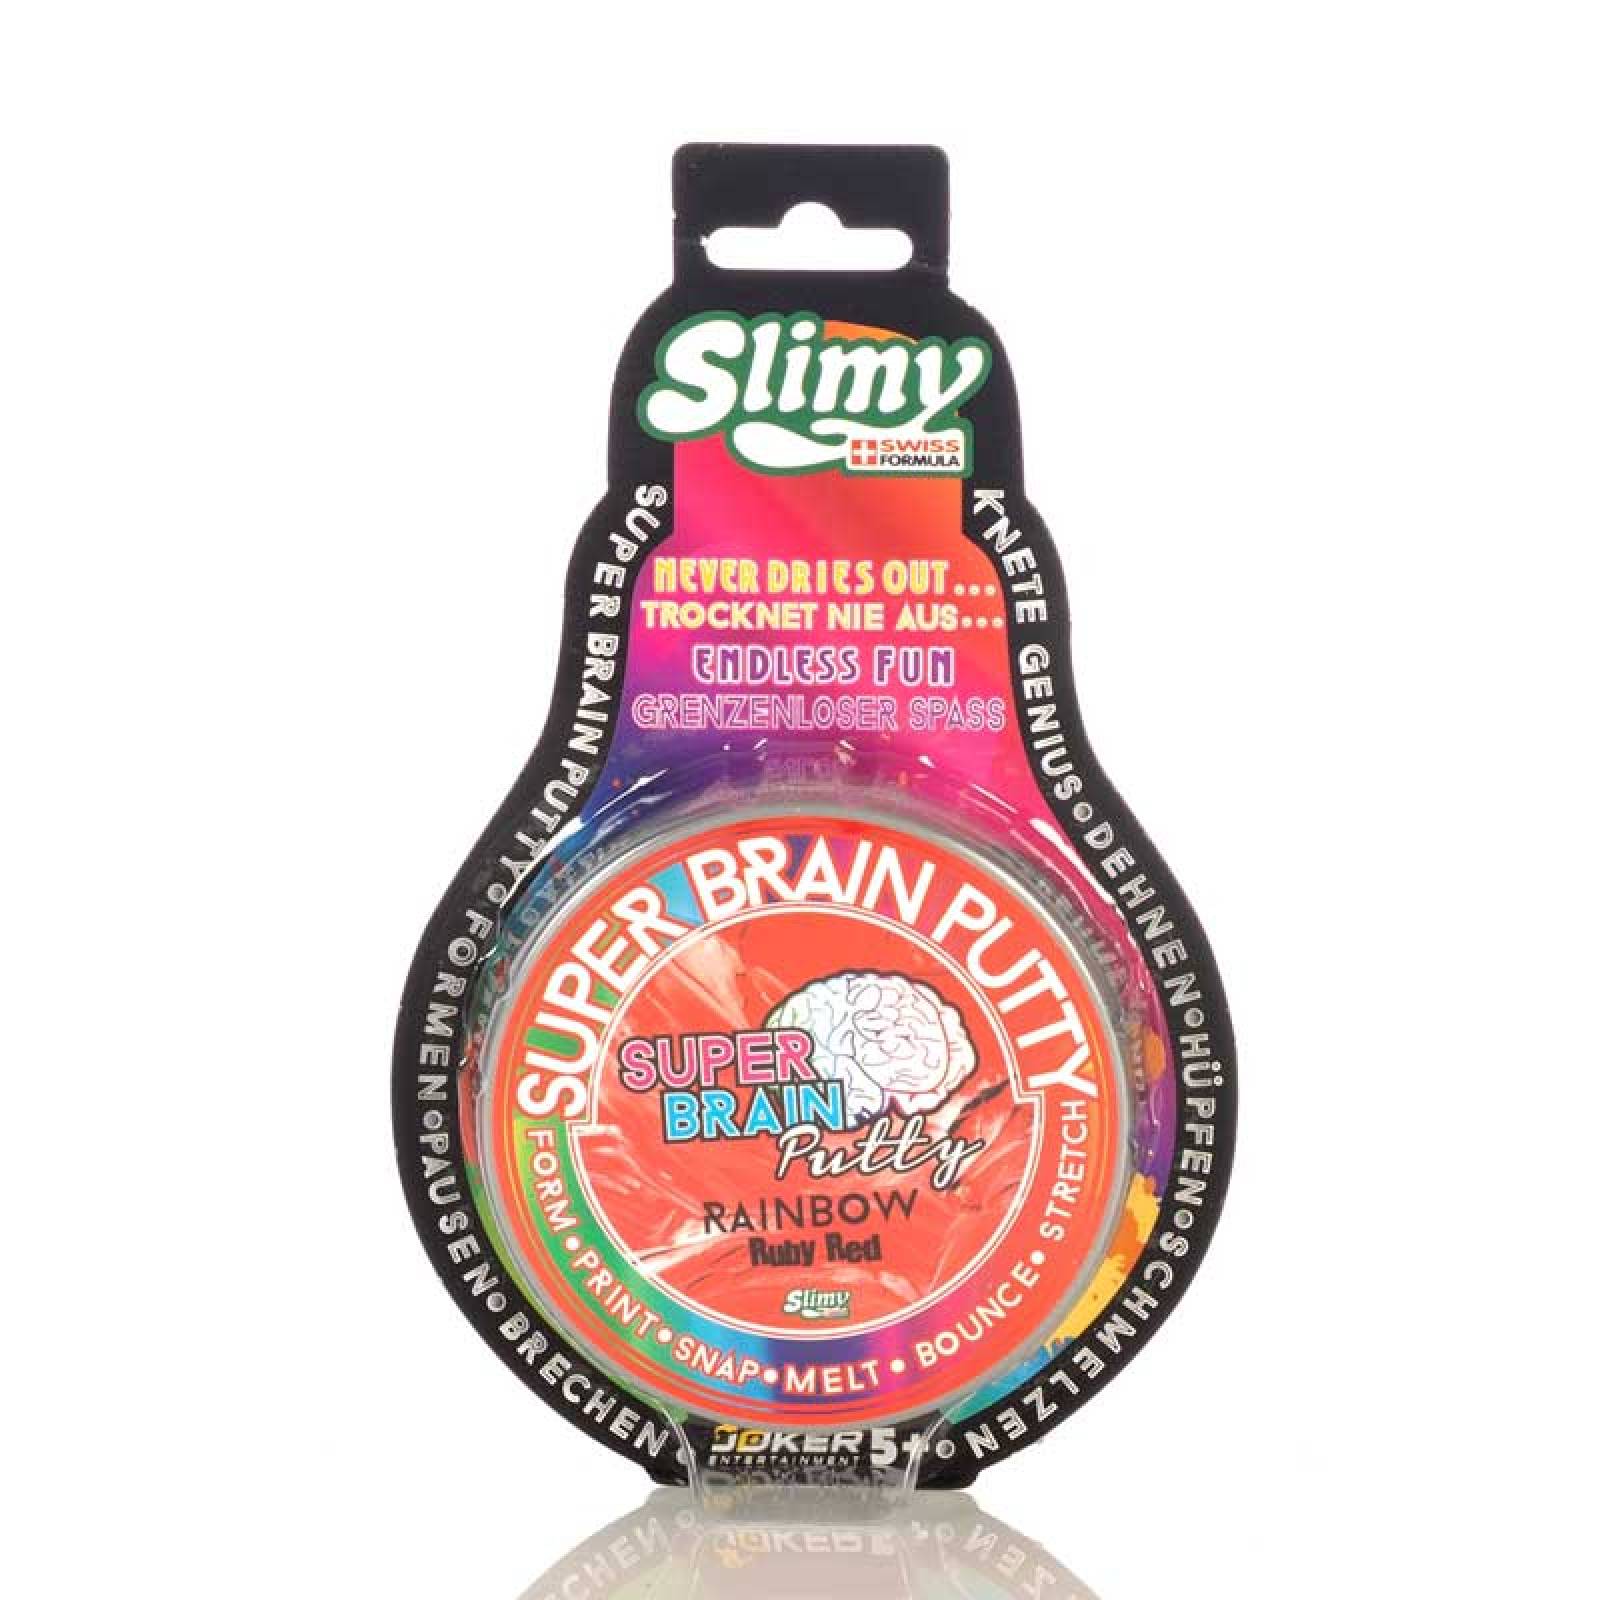 Slime Super Brain Putty Rainbow Ruby Red Formula Suiza